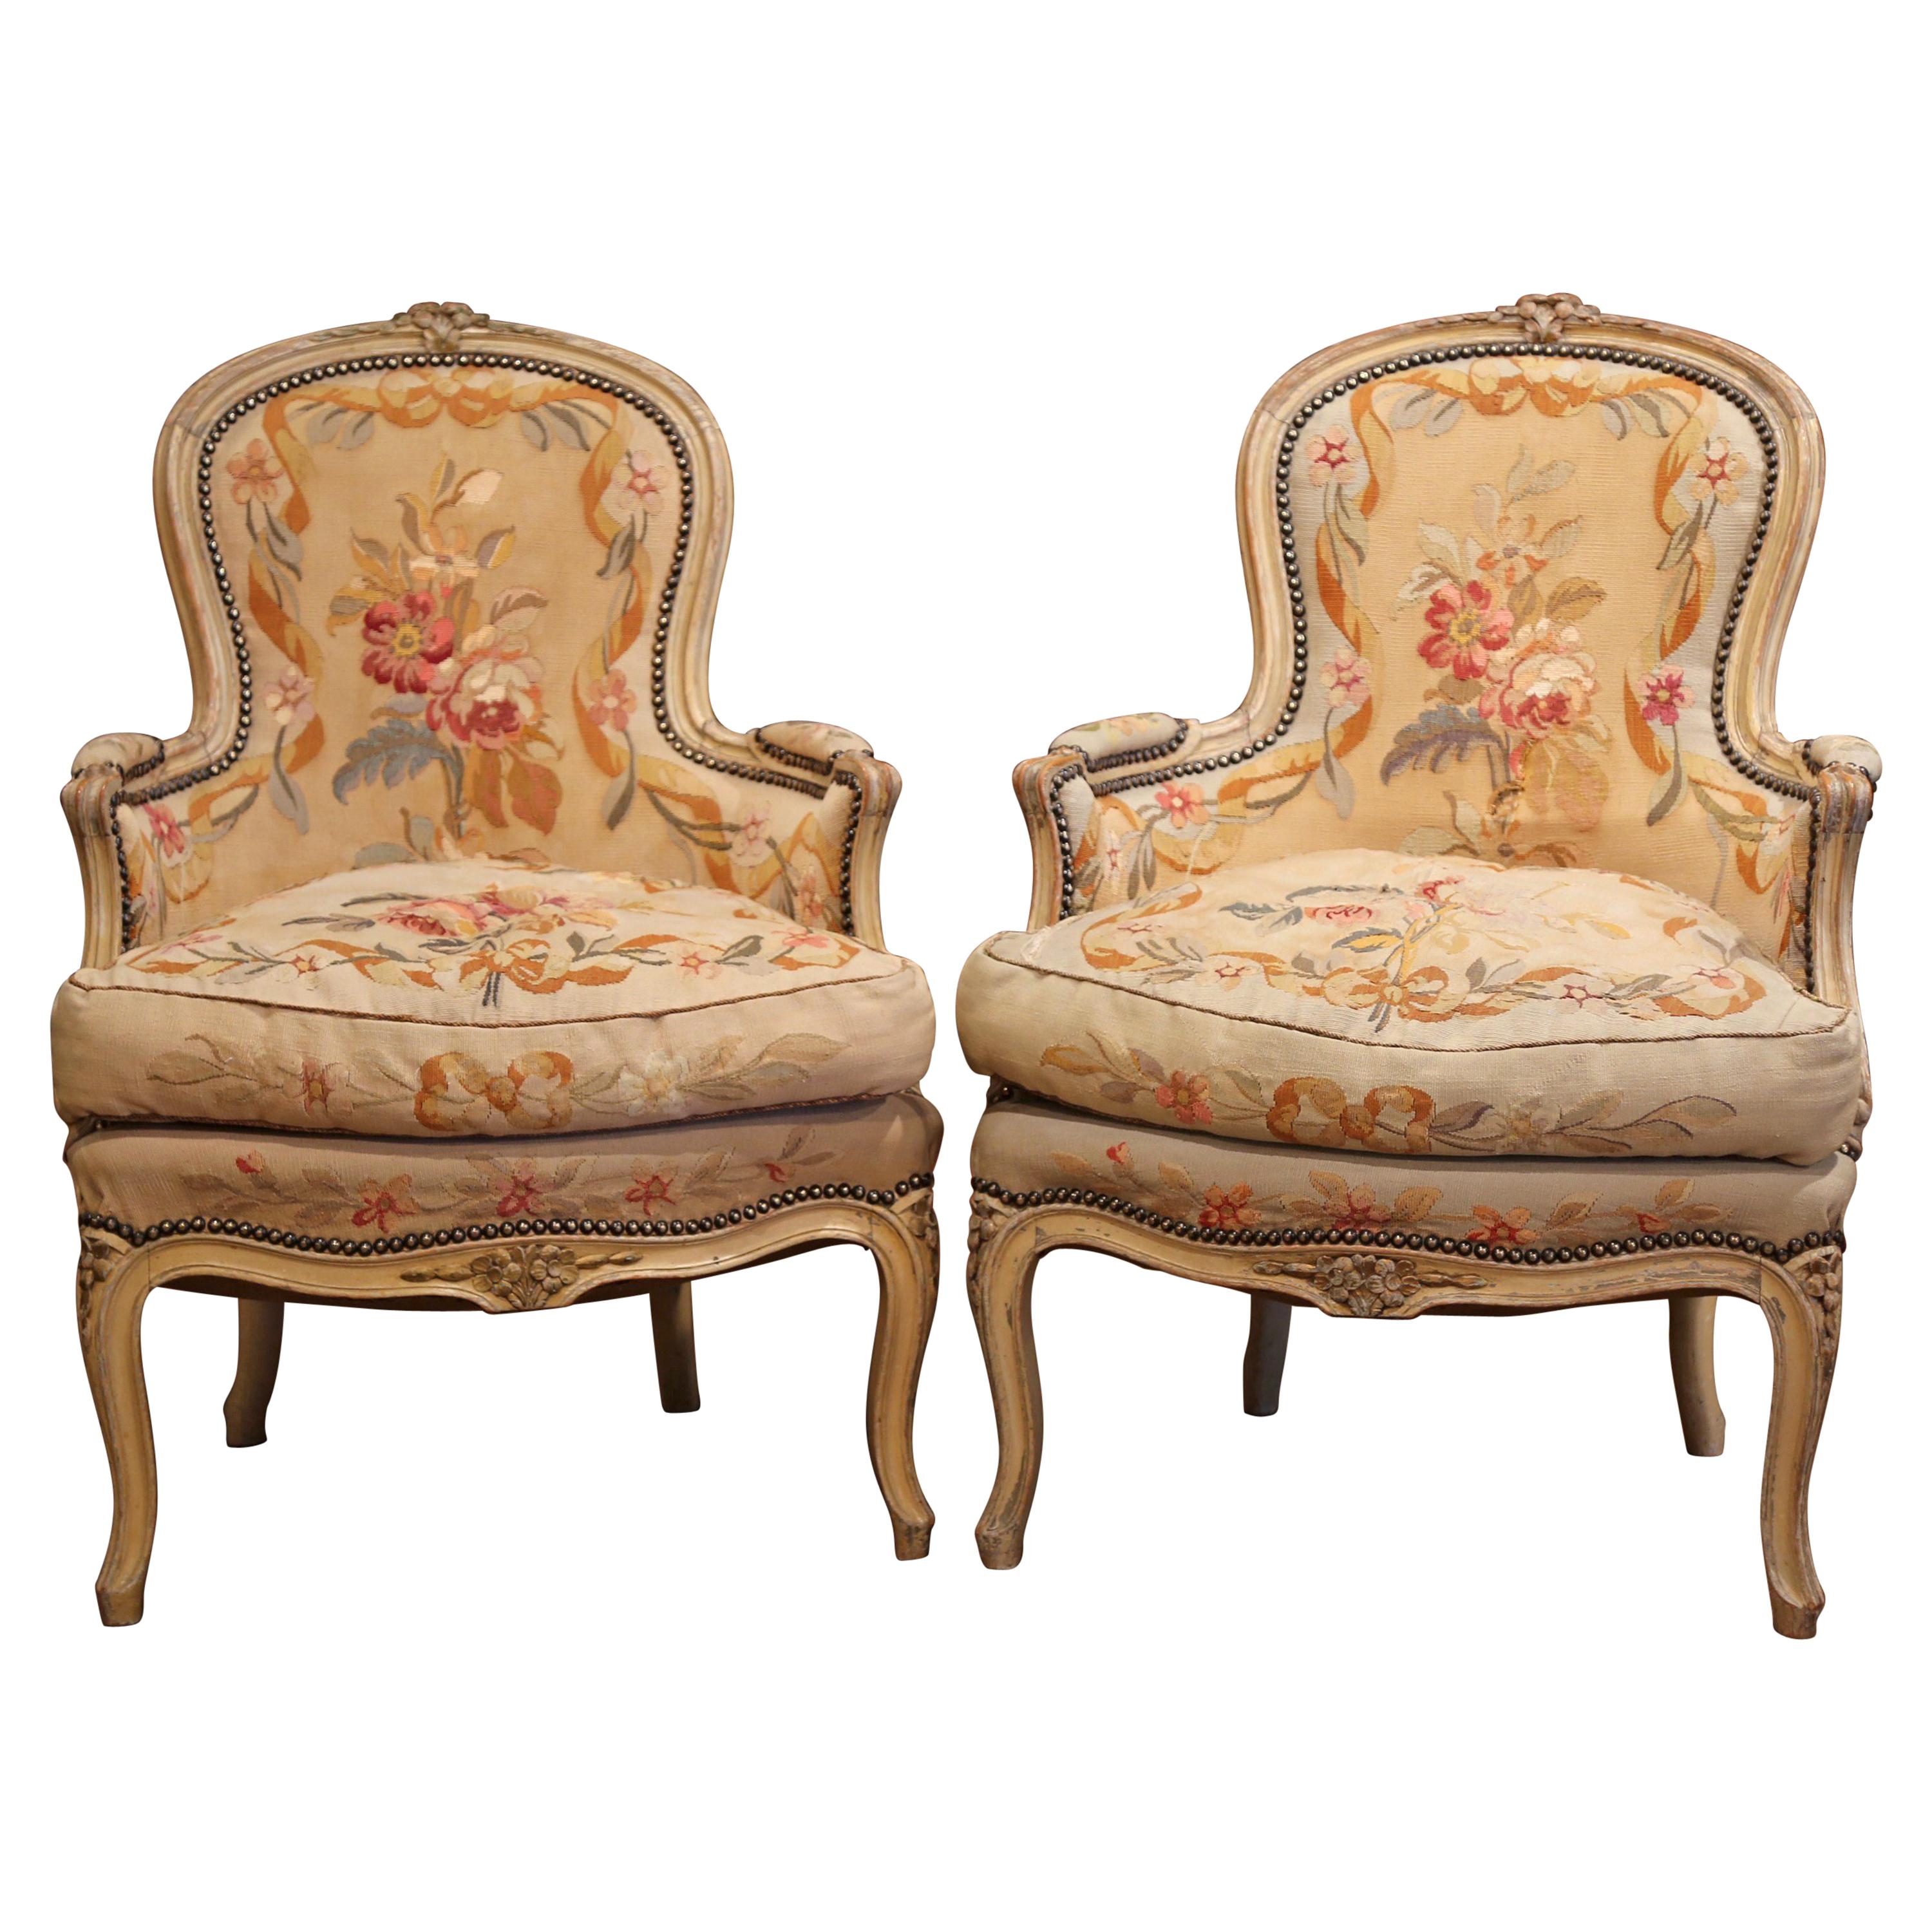 Pair of 19th Century French Louis XV Carved Armchairs with Aubusson Tapestry